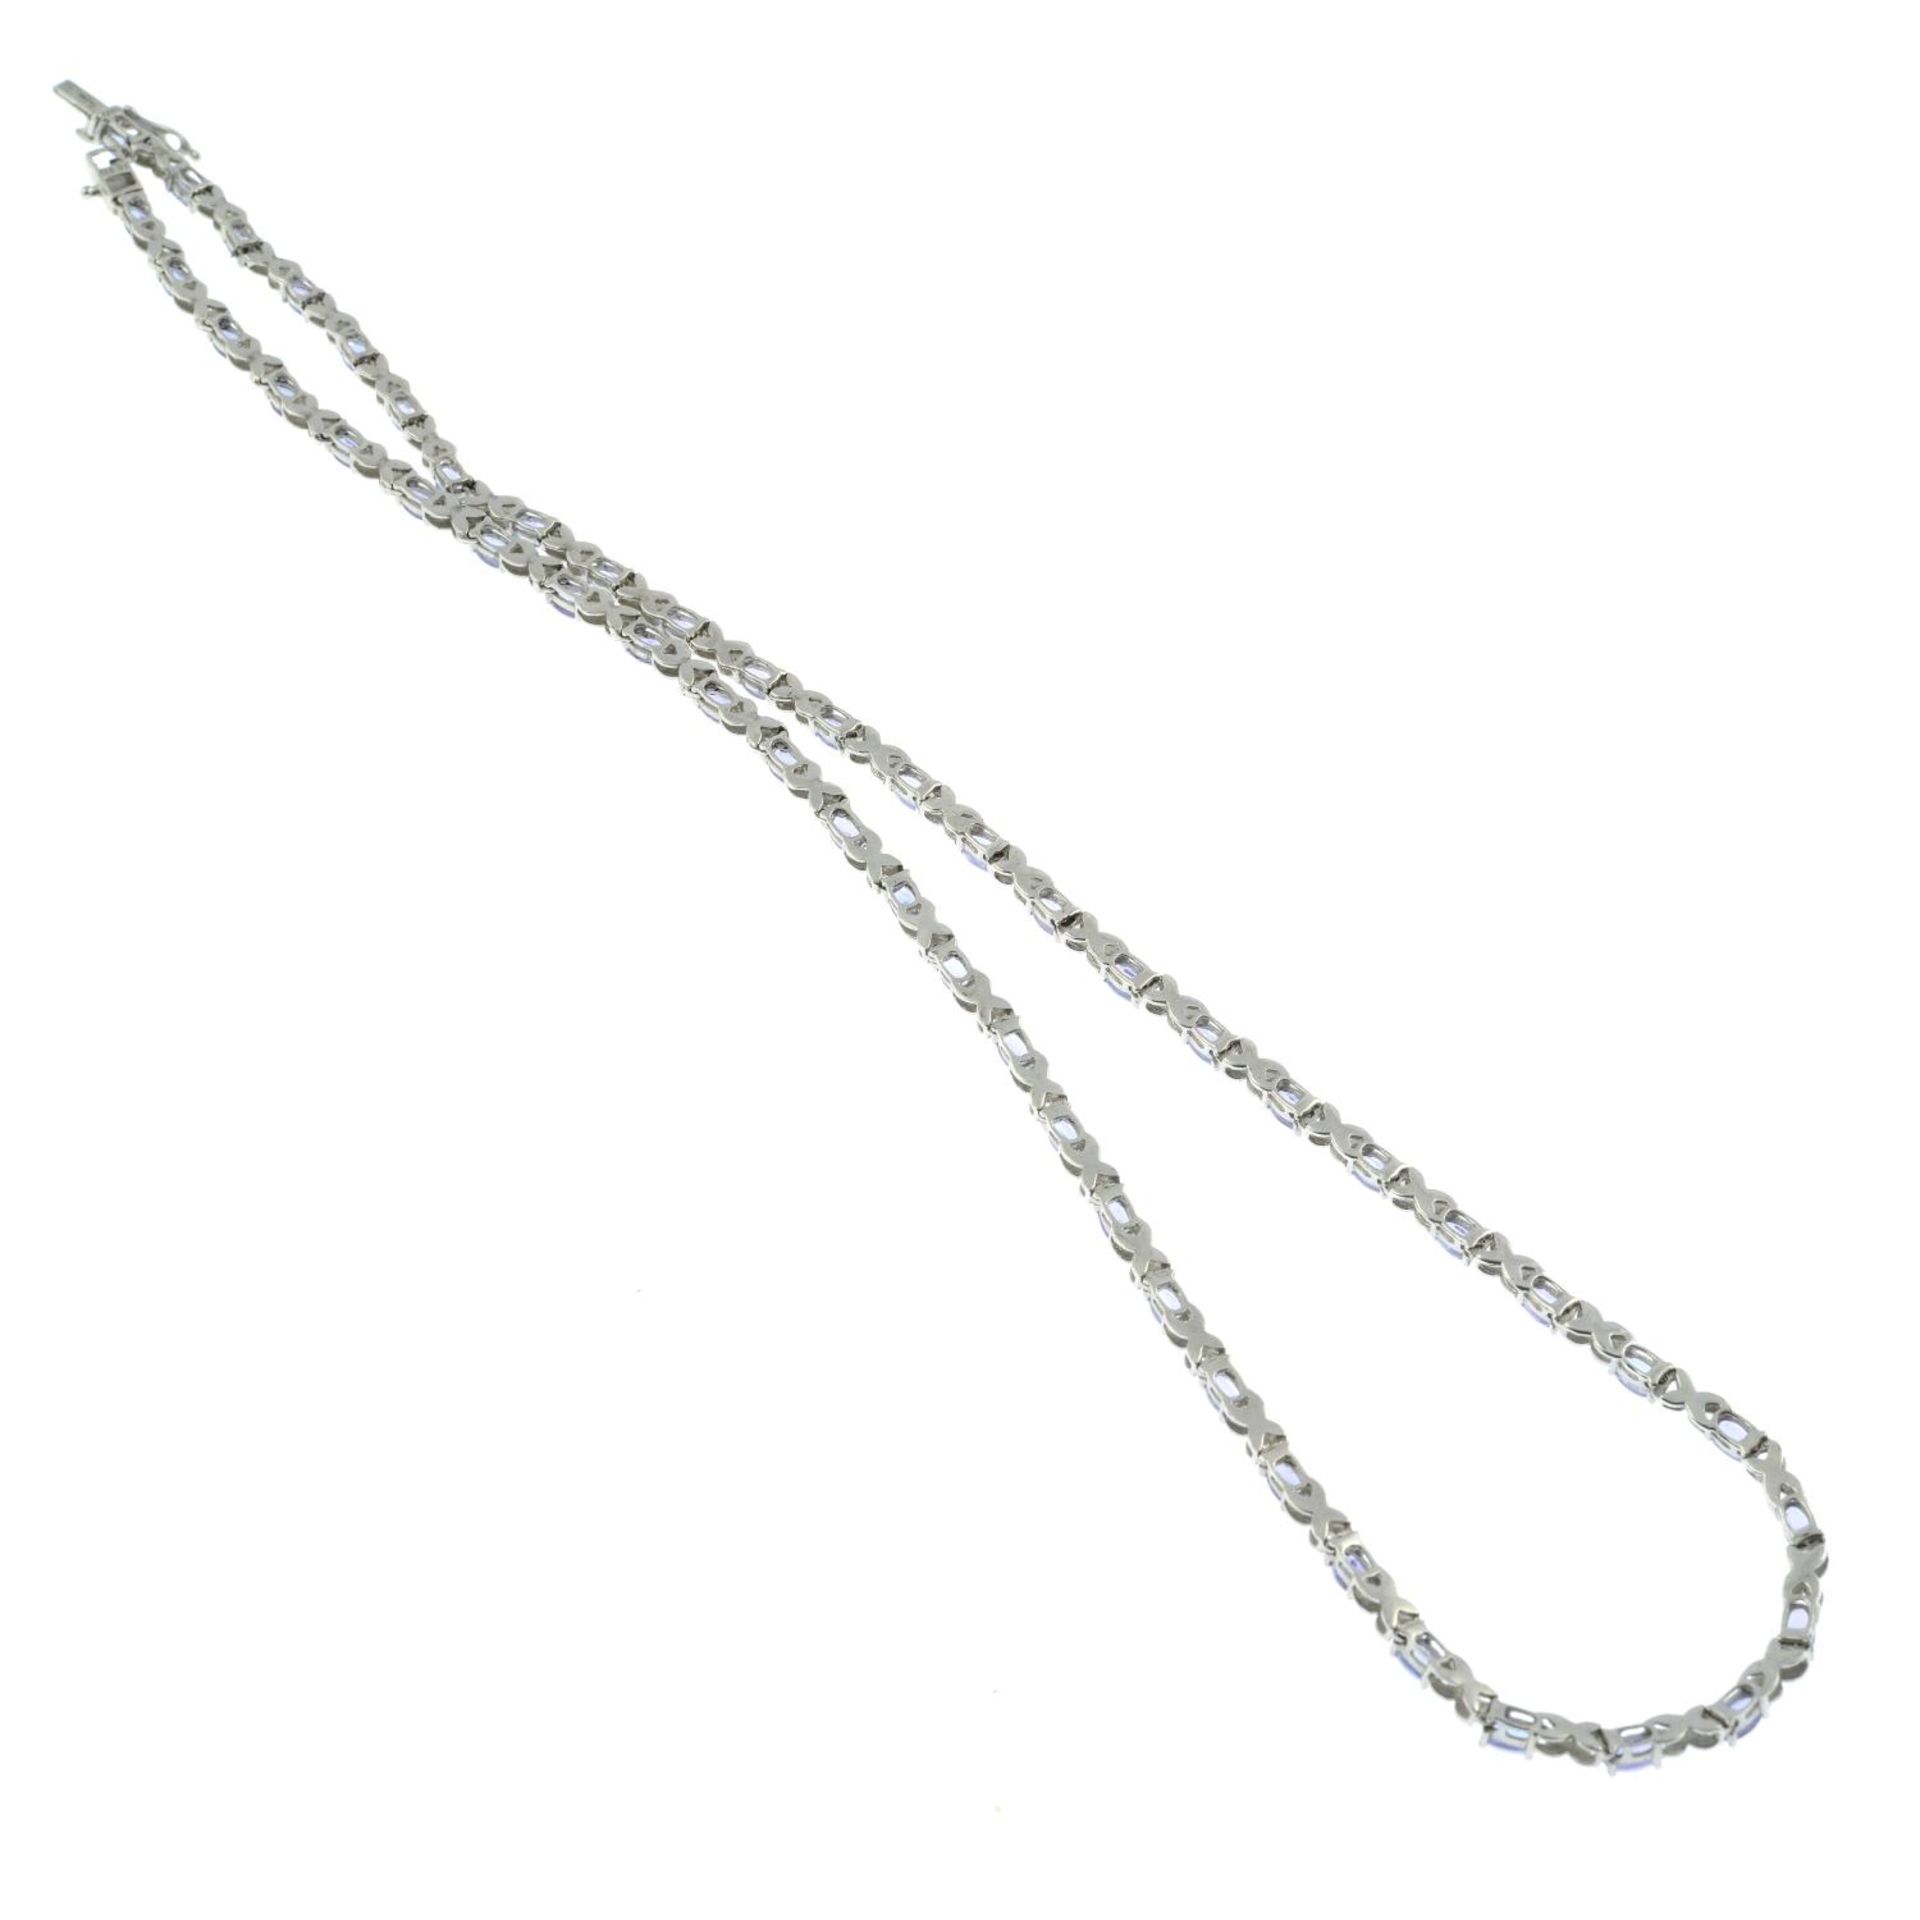 A silver tanzanite necklace.Hallmarks for silver.Length 53cms. - Image 3 of 3